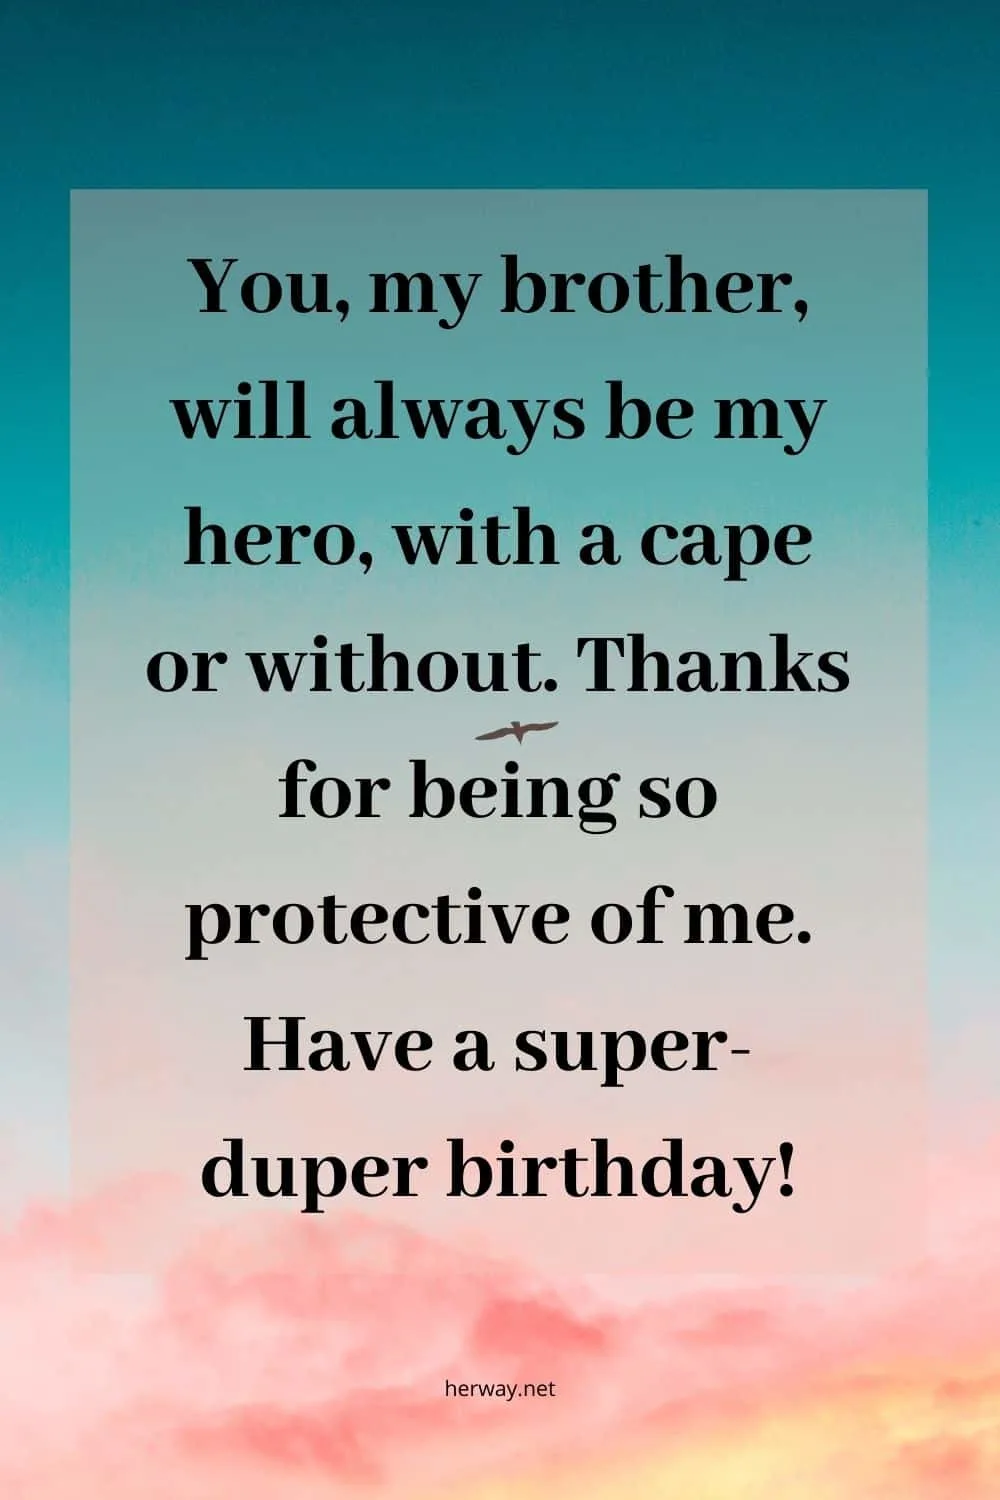 Birthday Wishes For Brother: 20+ Wishes For His Special Day